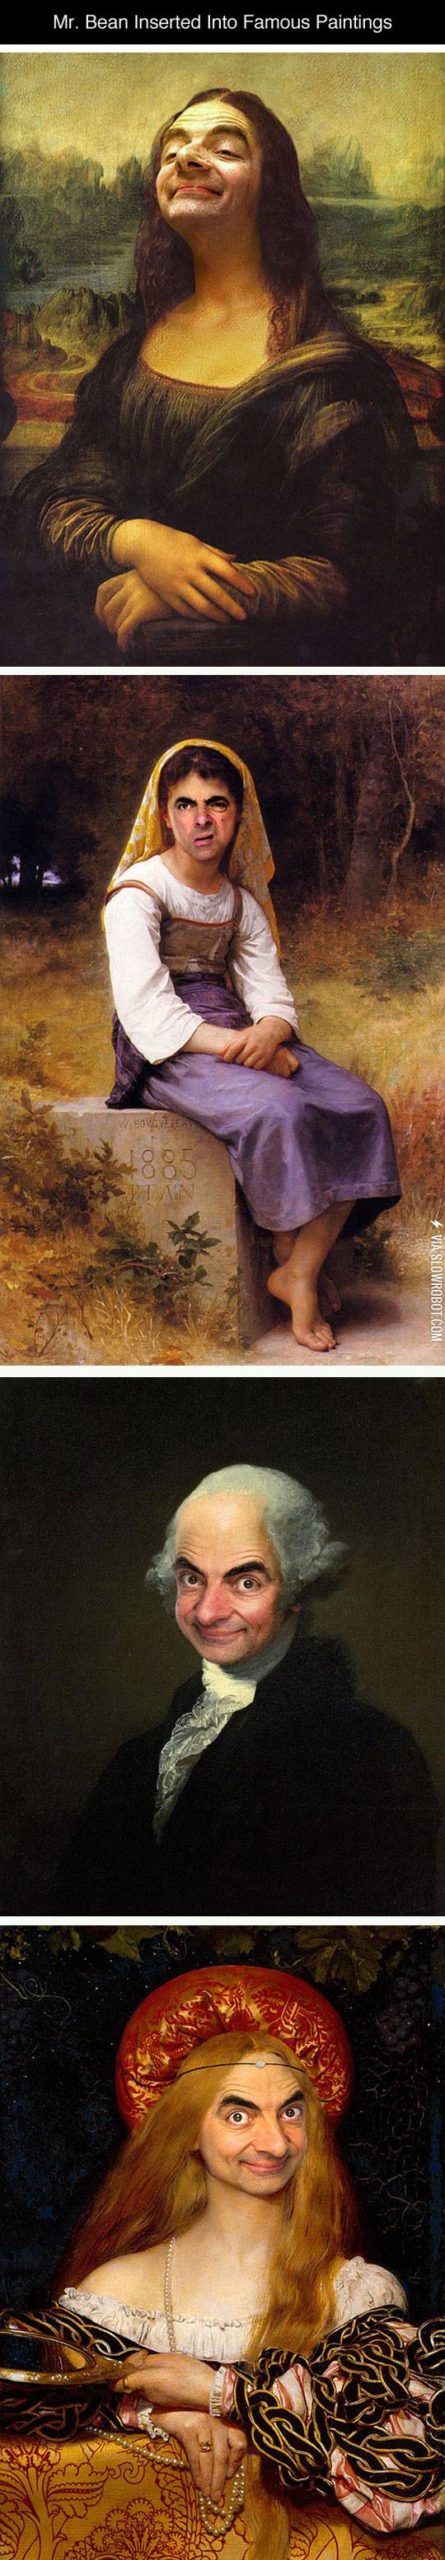 Mr.+Bean+inserted+into+famous+paintings.